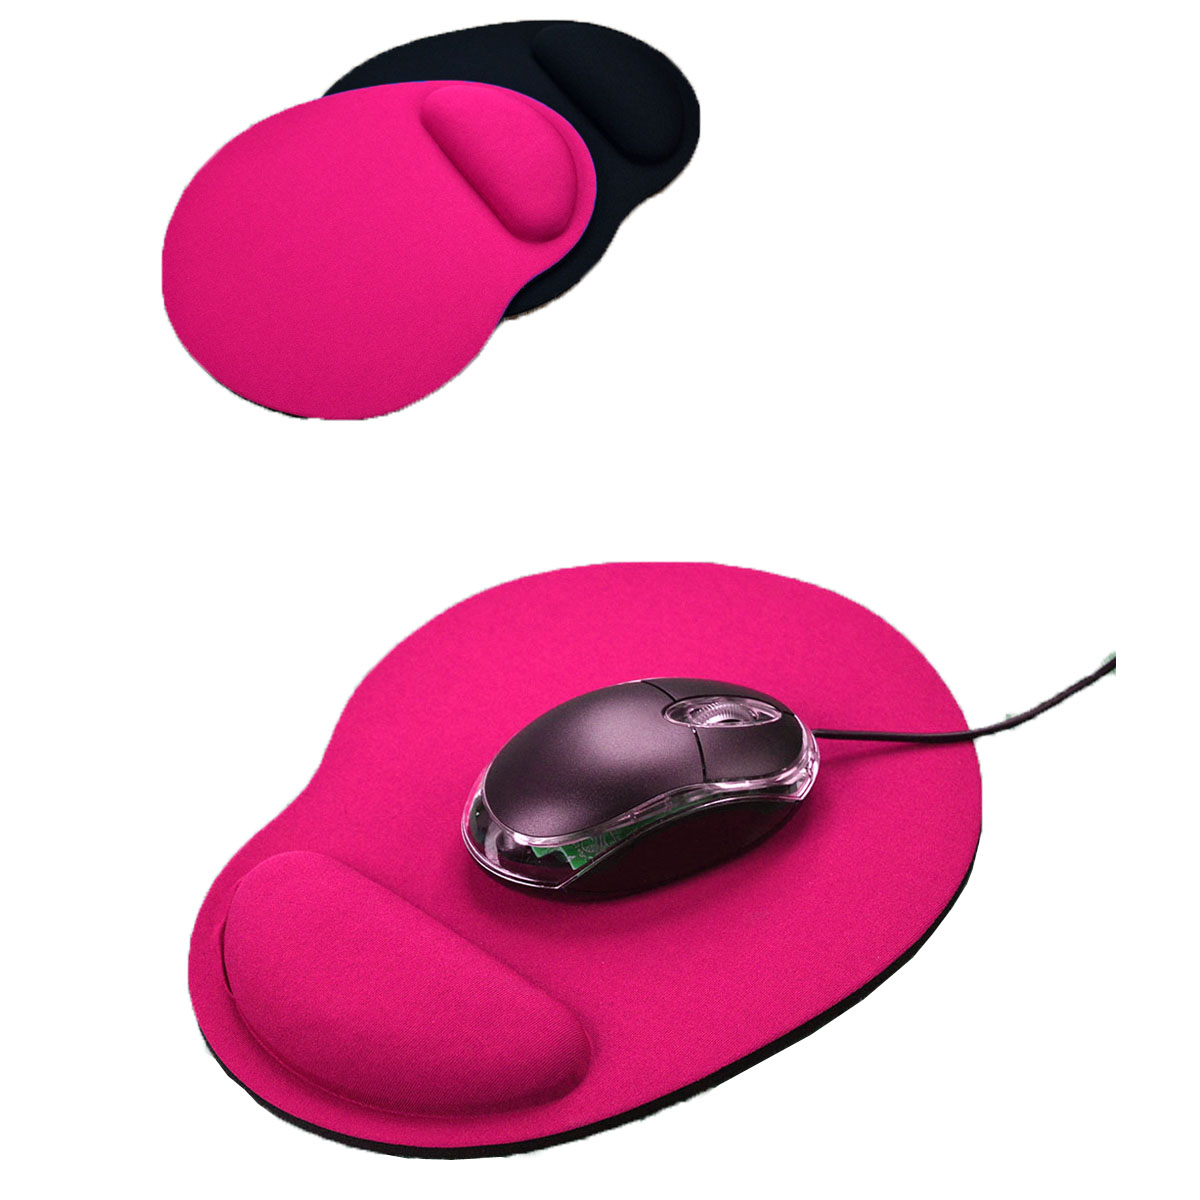 GL-AKL0027 Soft Mouse Pad with Raised Rest